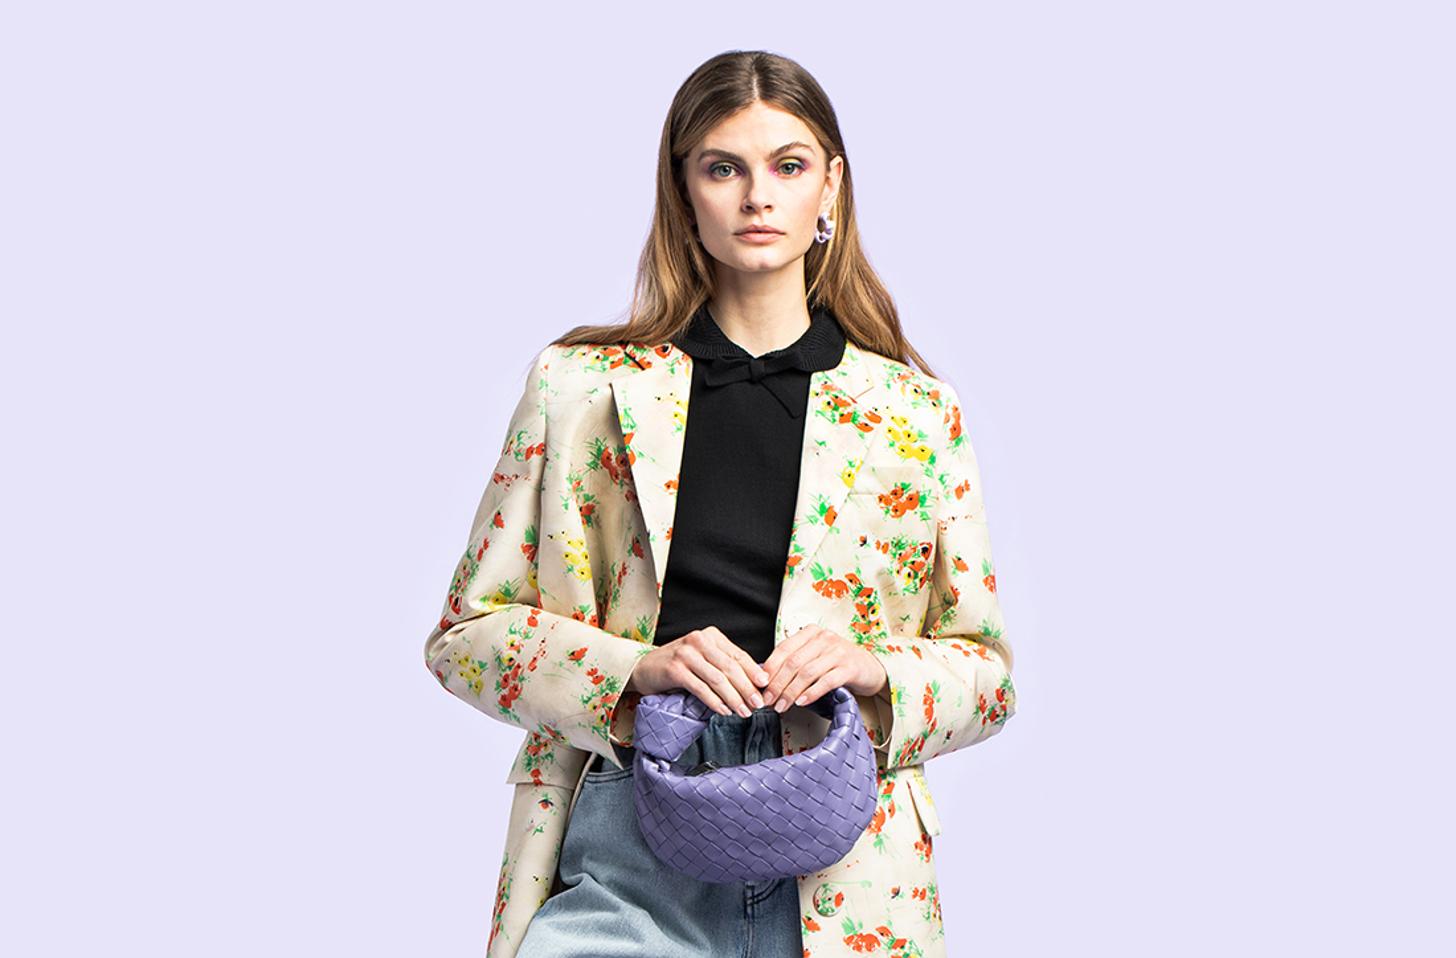 Spring Summer 2021 bags: fashion trends and colors